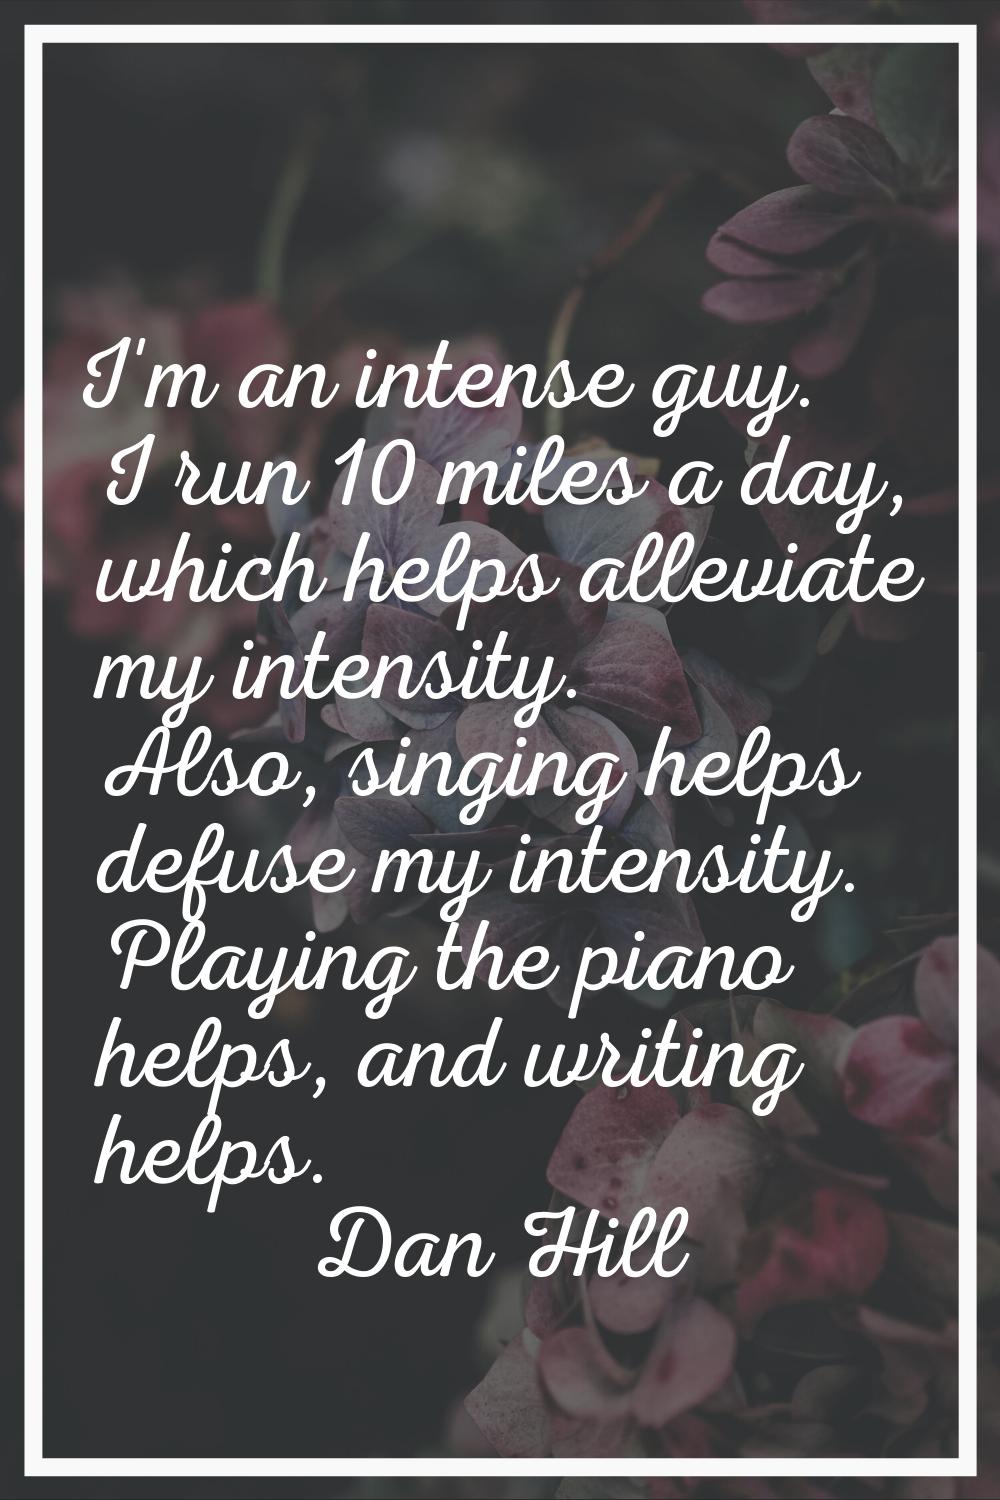 I'm an intense guy. I run 10 miles a day, which helps alleviate my intensity. Also, singing helps d